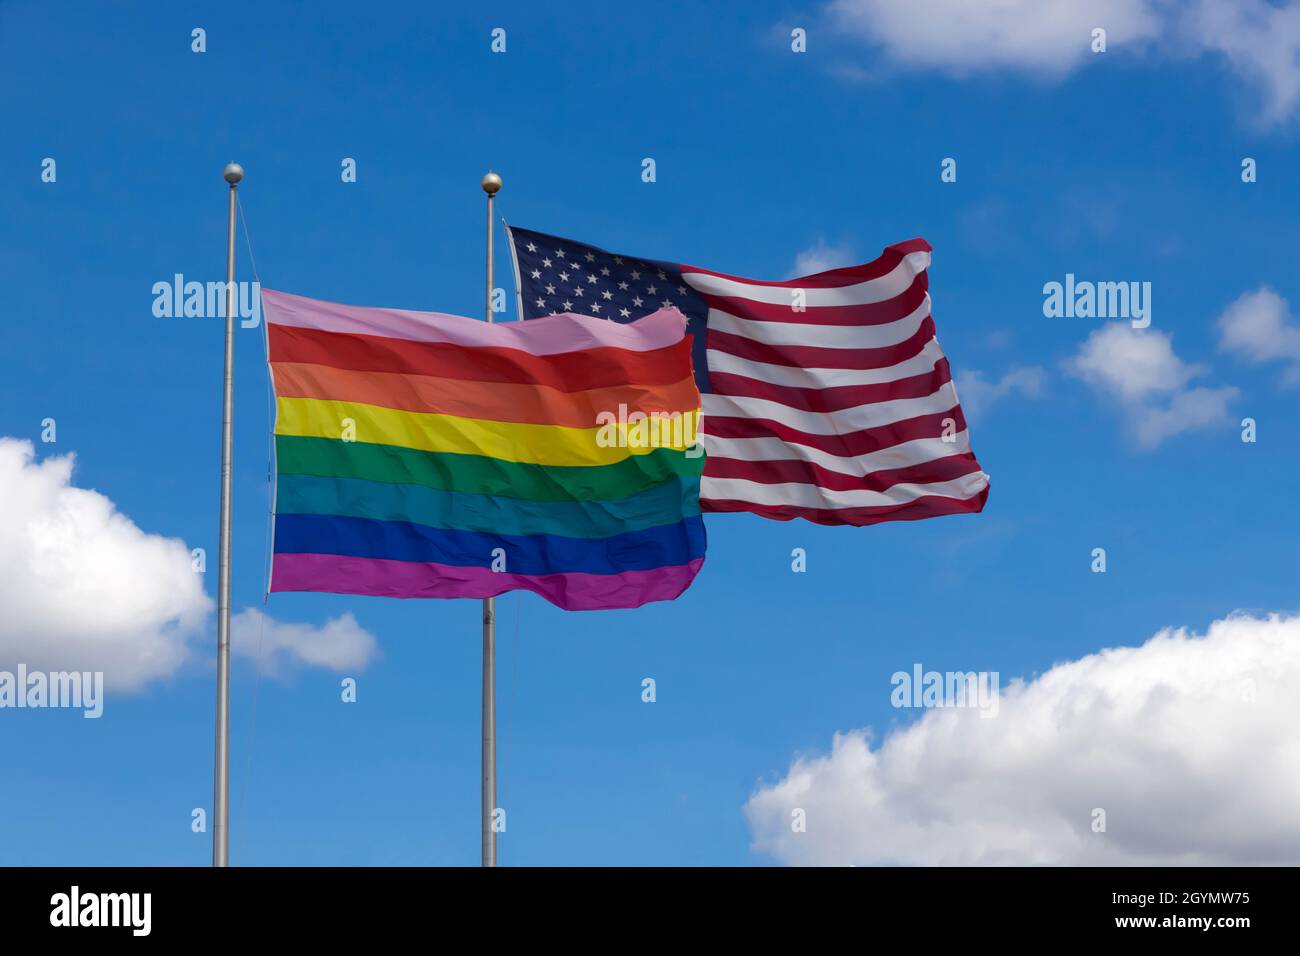 Rainbow flag/gay pride flag (LGBT) flying next to American flag on Cherry Grove, Fire Island, New York, United States of America. Stock Photo